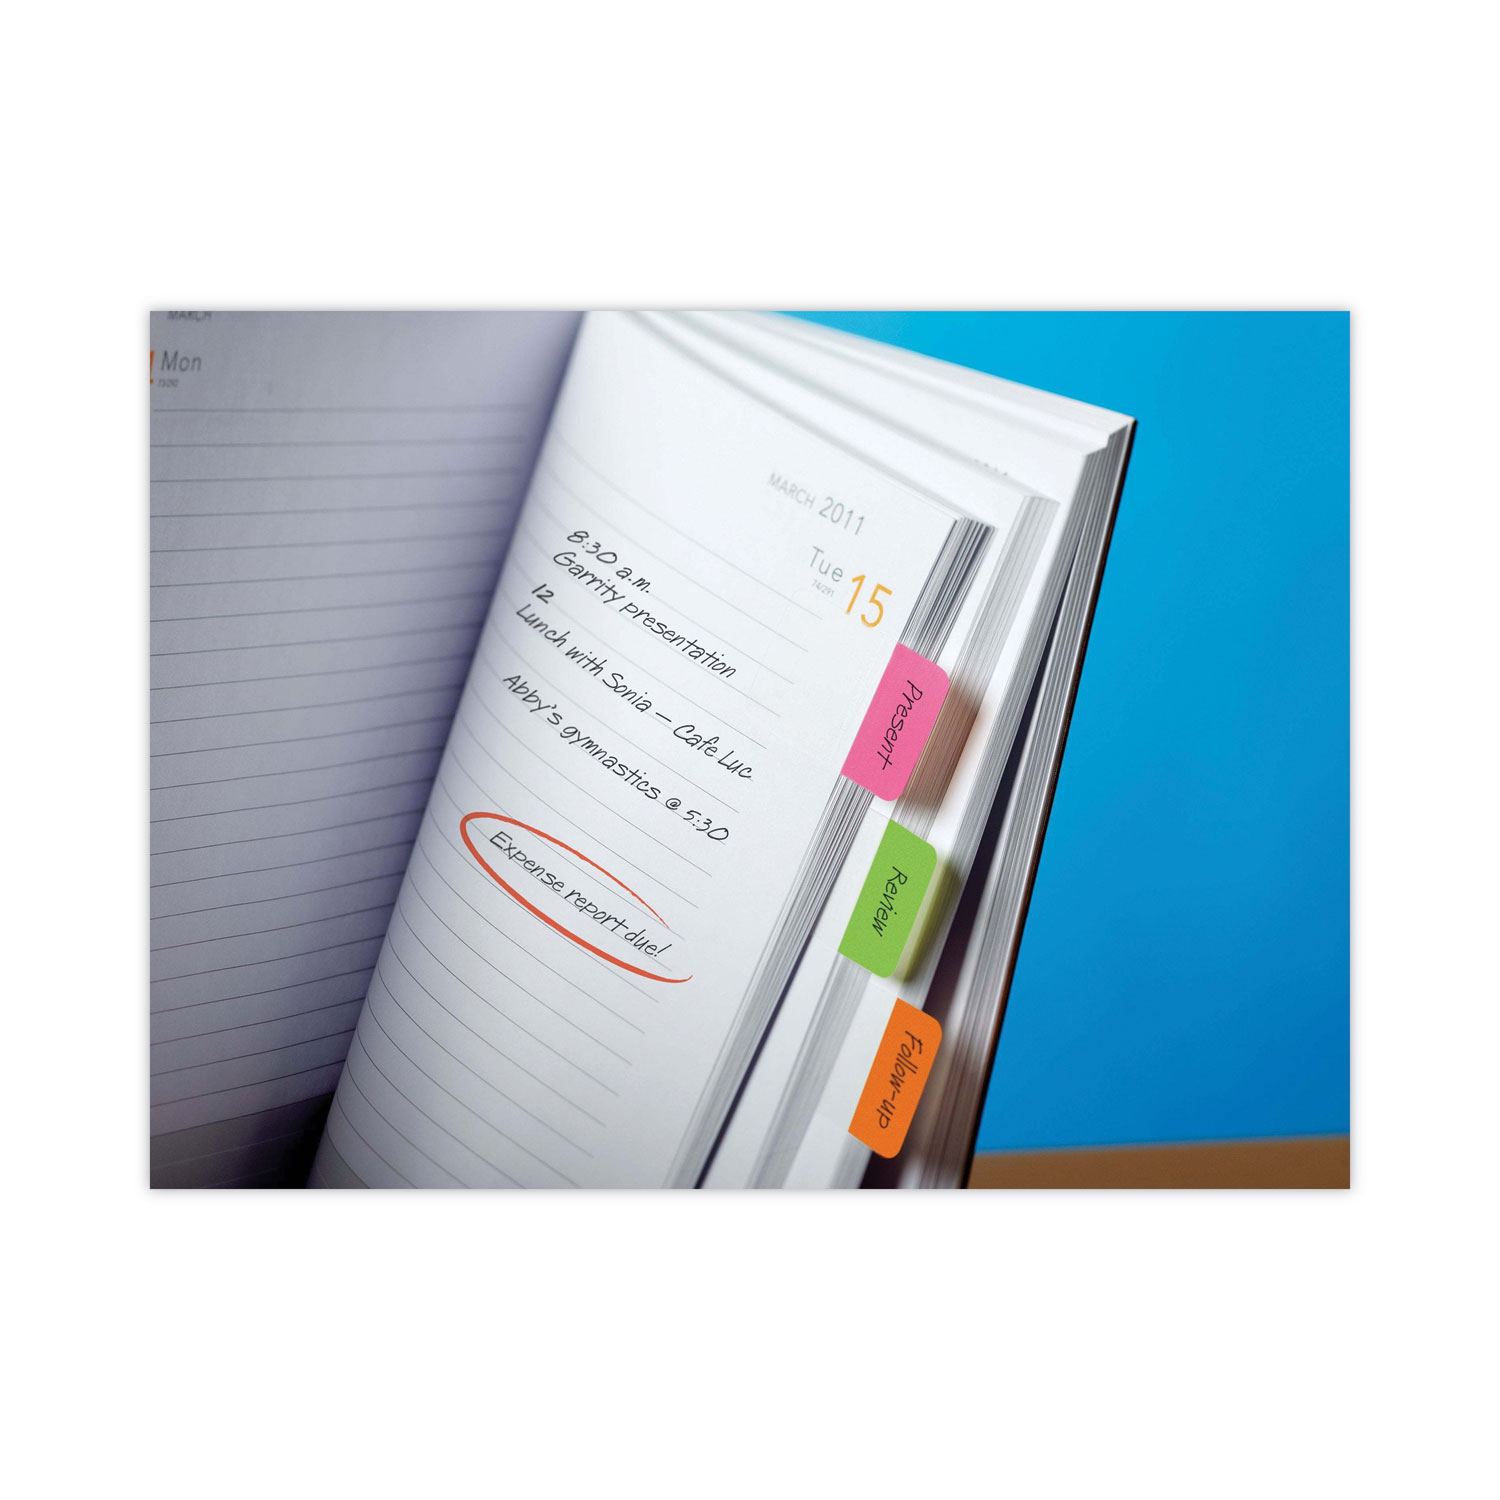 Post-it® Tabs 1 Plain Solid Color Tabs, 1/5-Cut, Assorted Colors, 1 Wide,  66/Pack